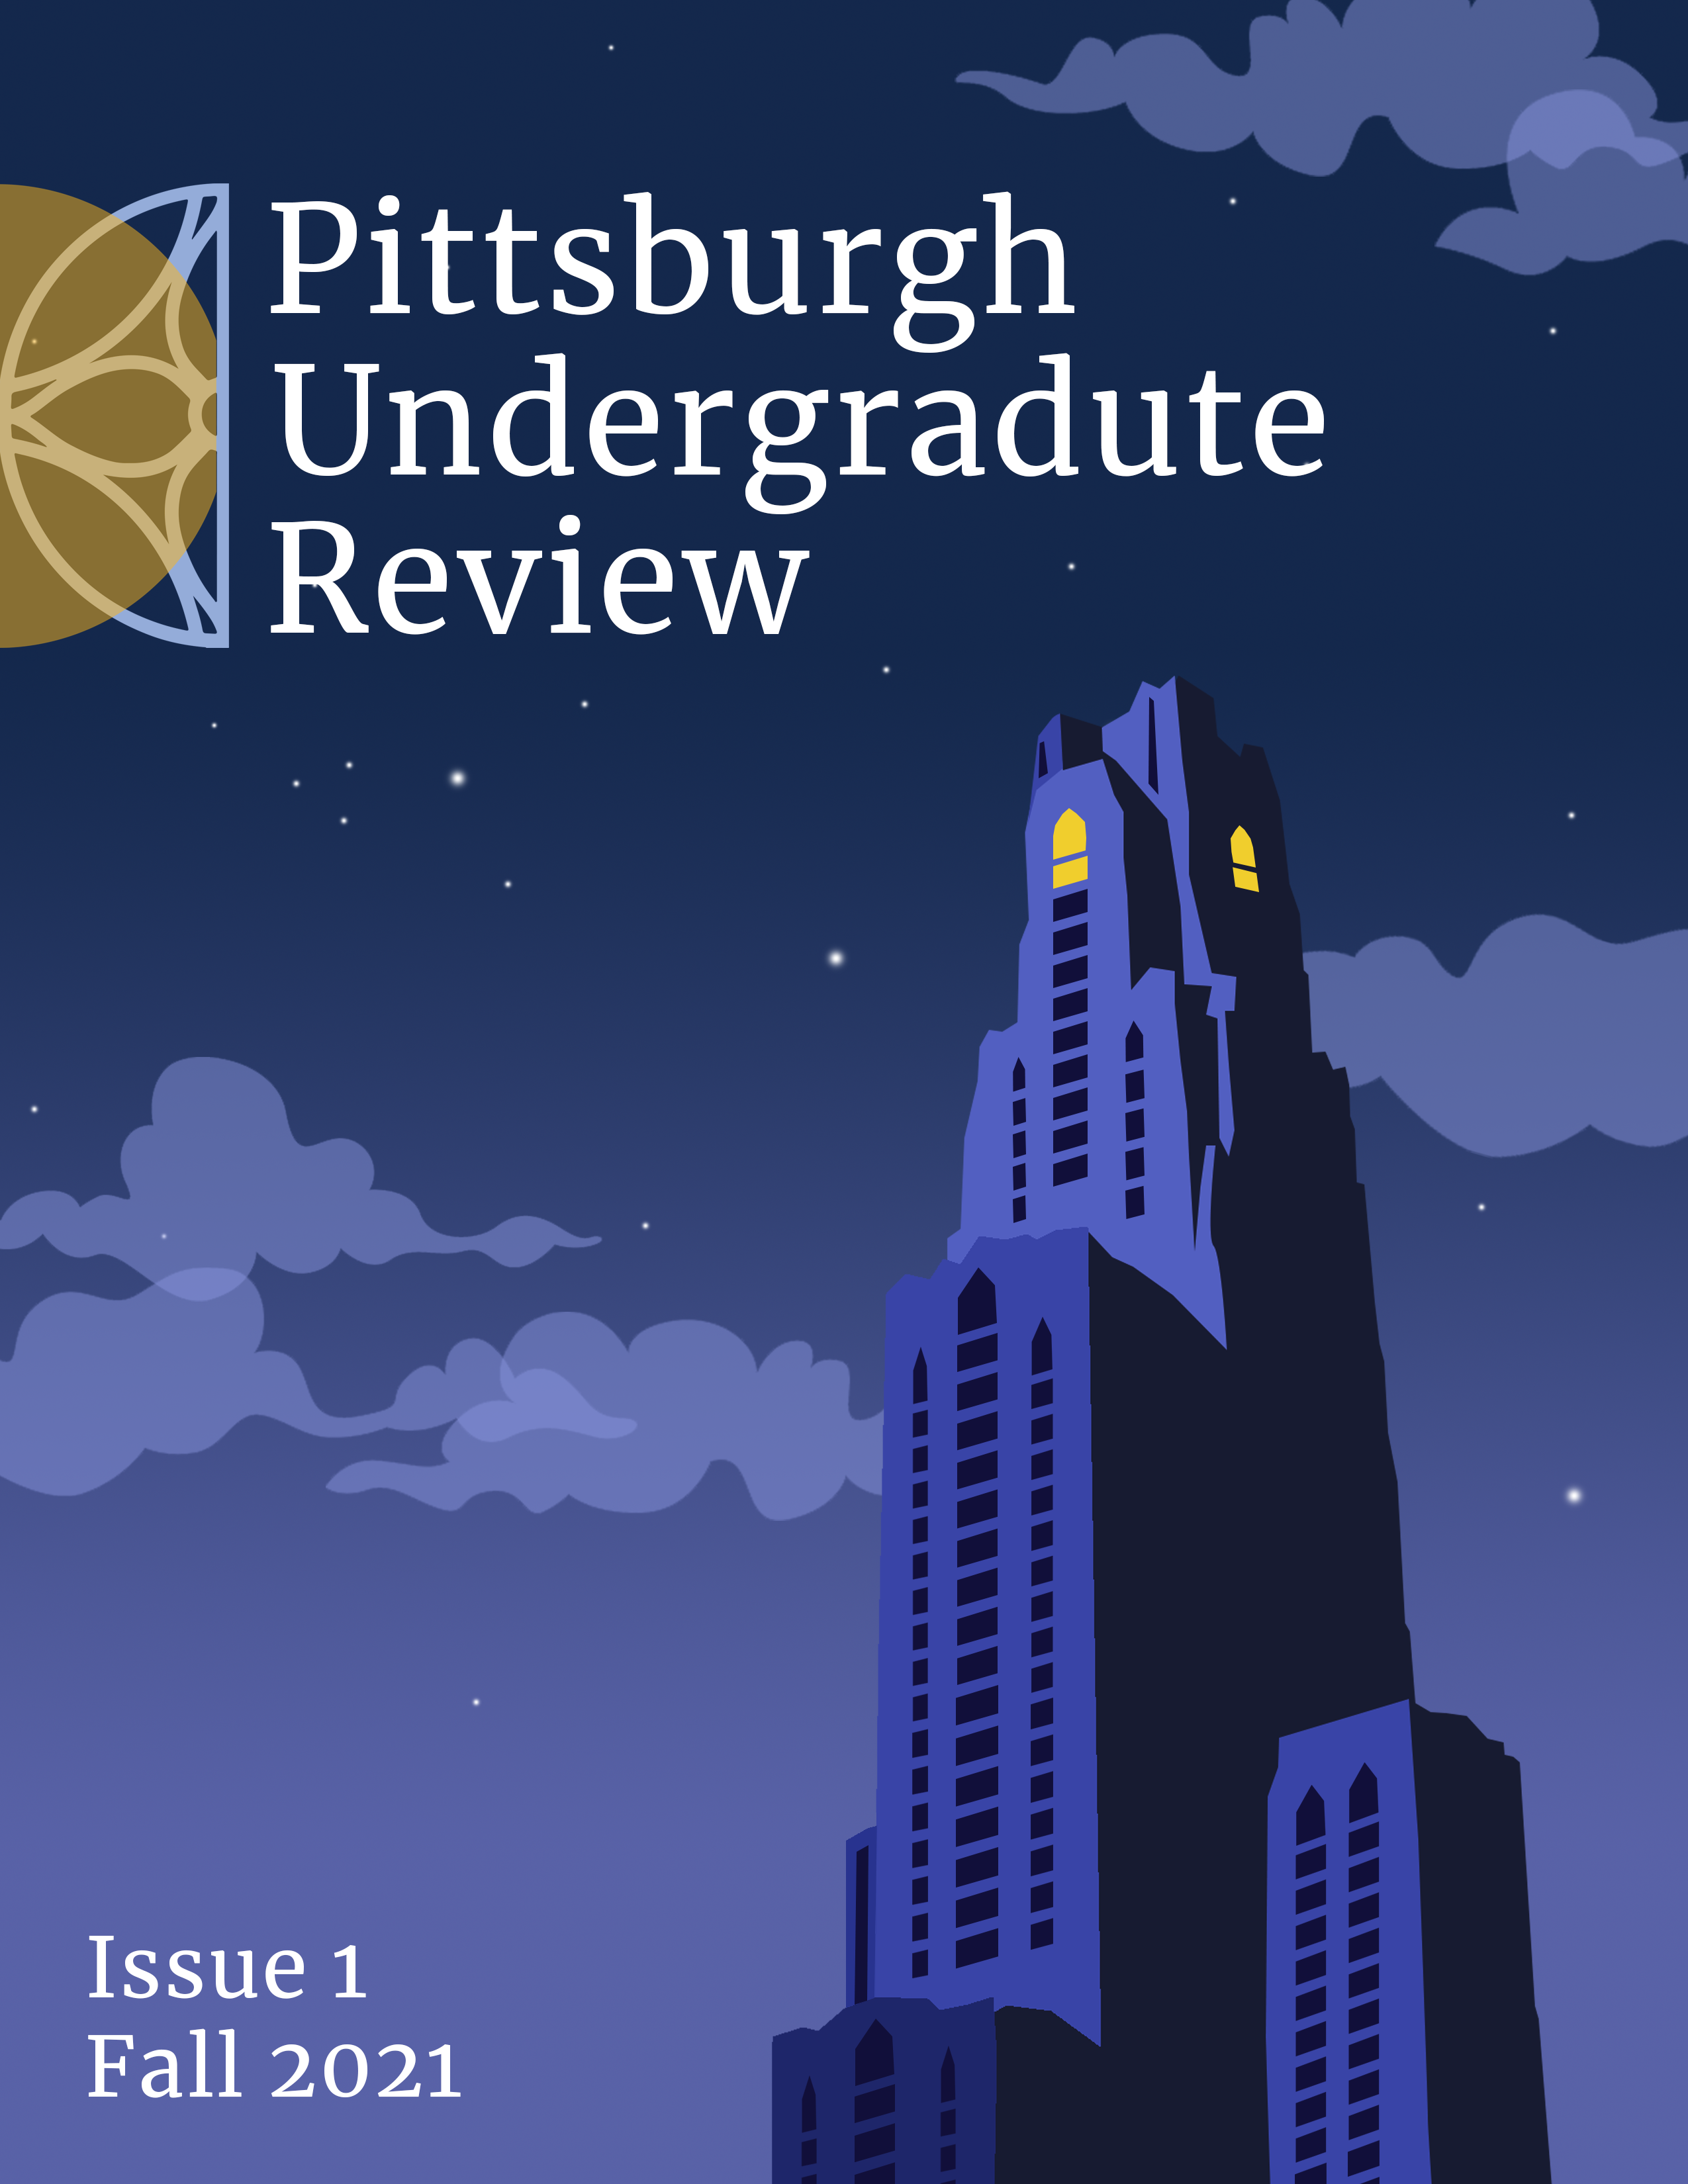 Cover image of issue 1. View of Cathedral of Learning against a night sky, with PUR logo. Light appears on on the 36th floor.